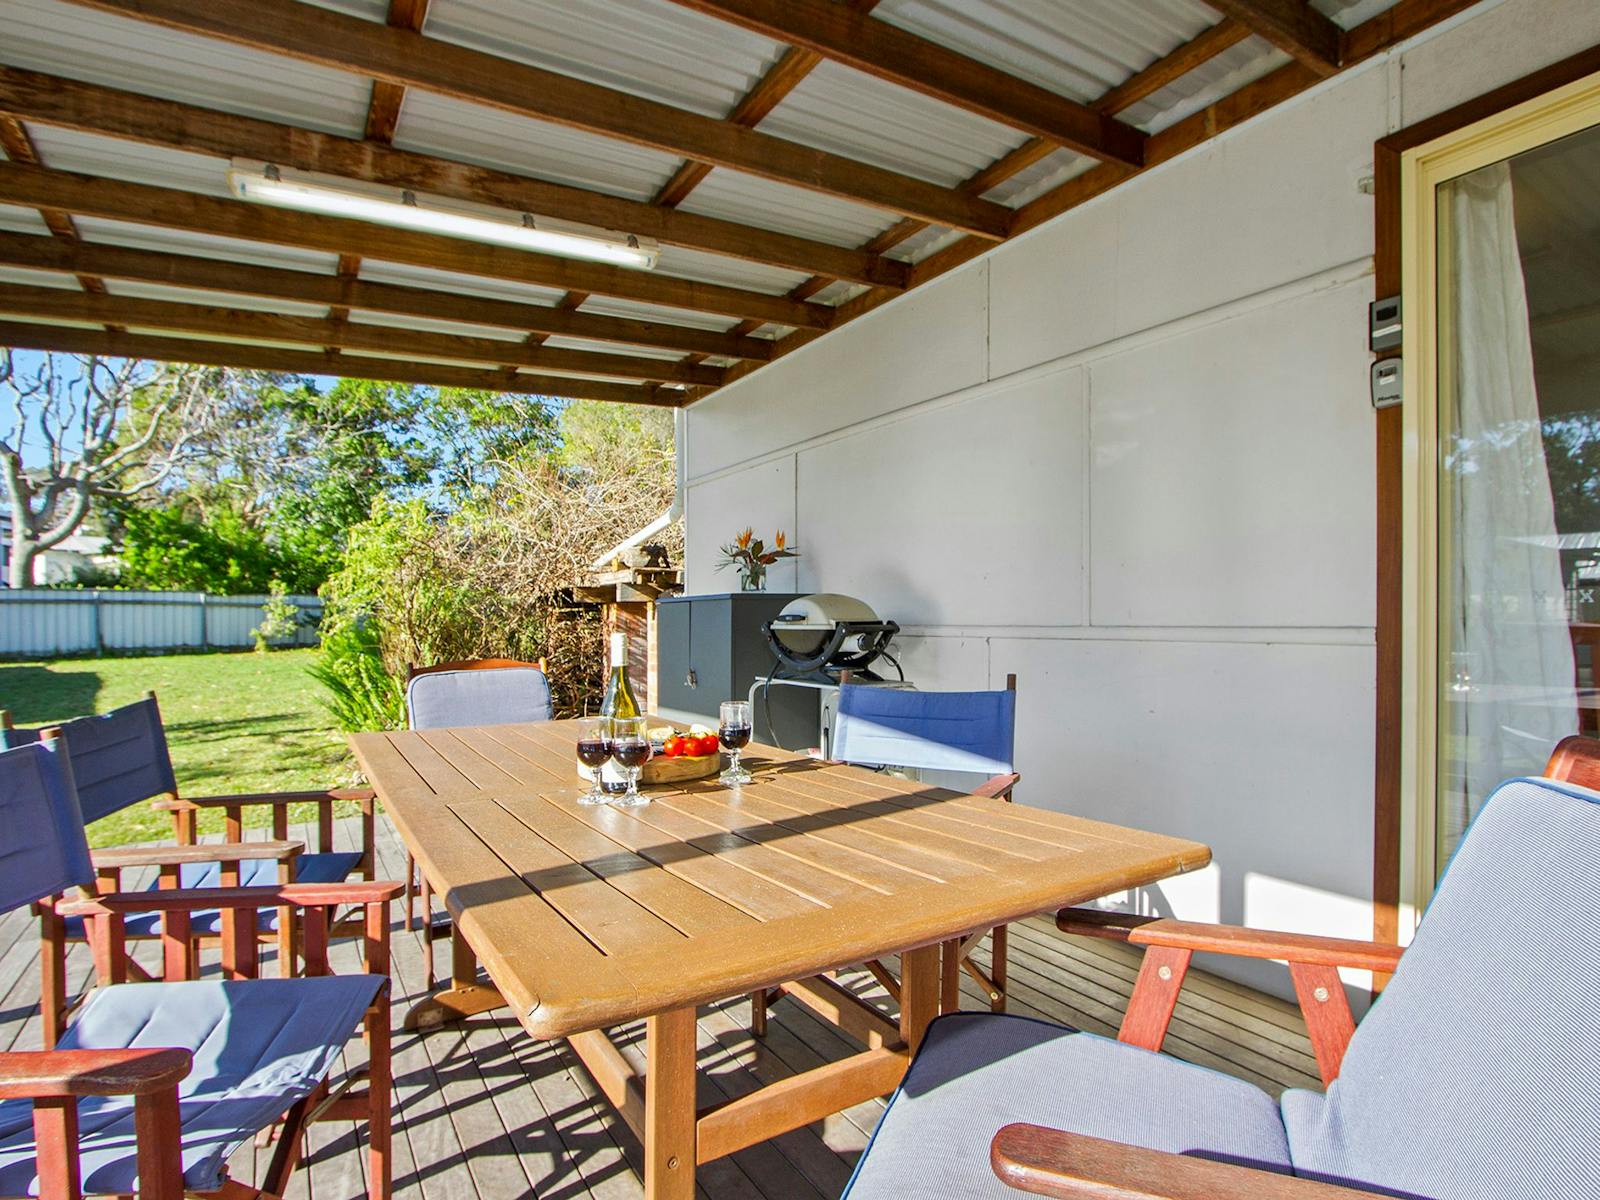 BBQ, Covered Outdoor Area, Outdoor deck, Outdoor Dining Seating